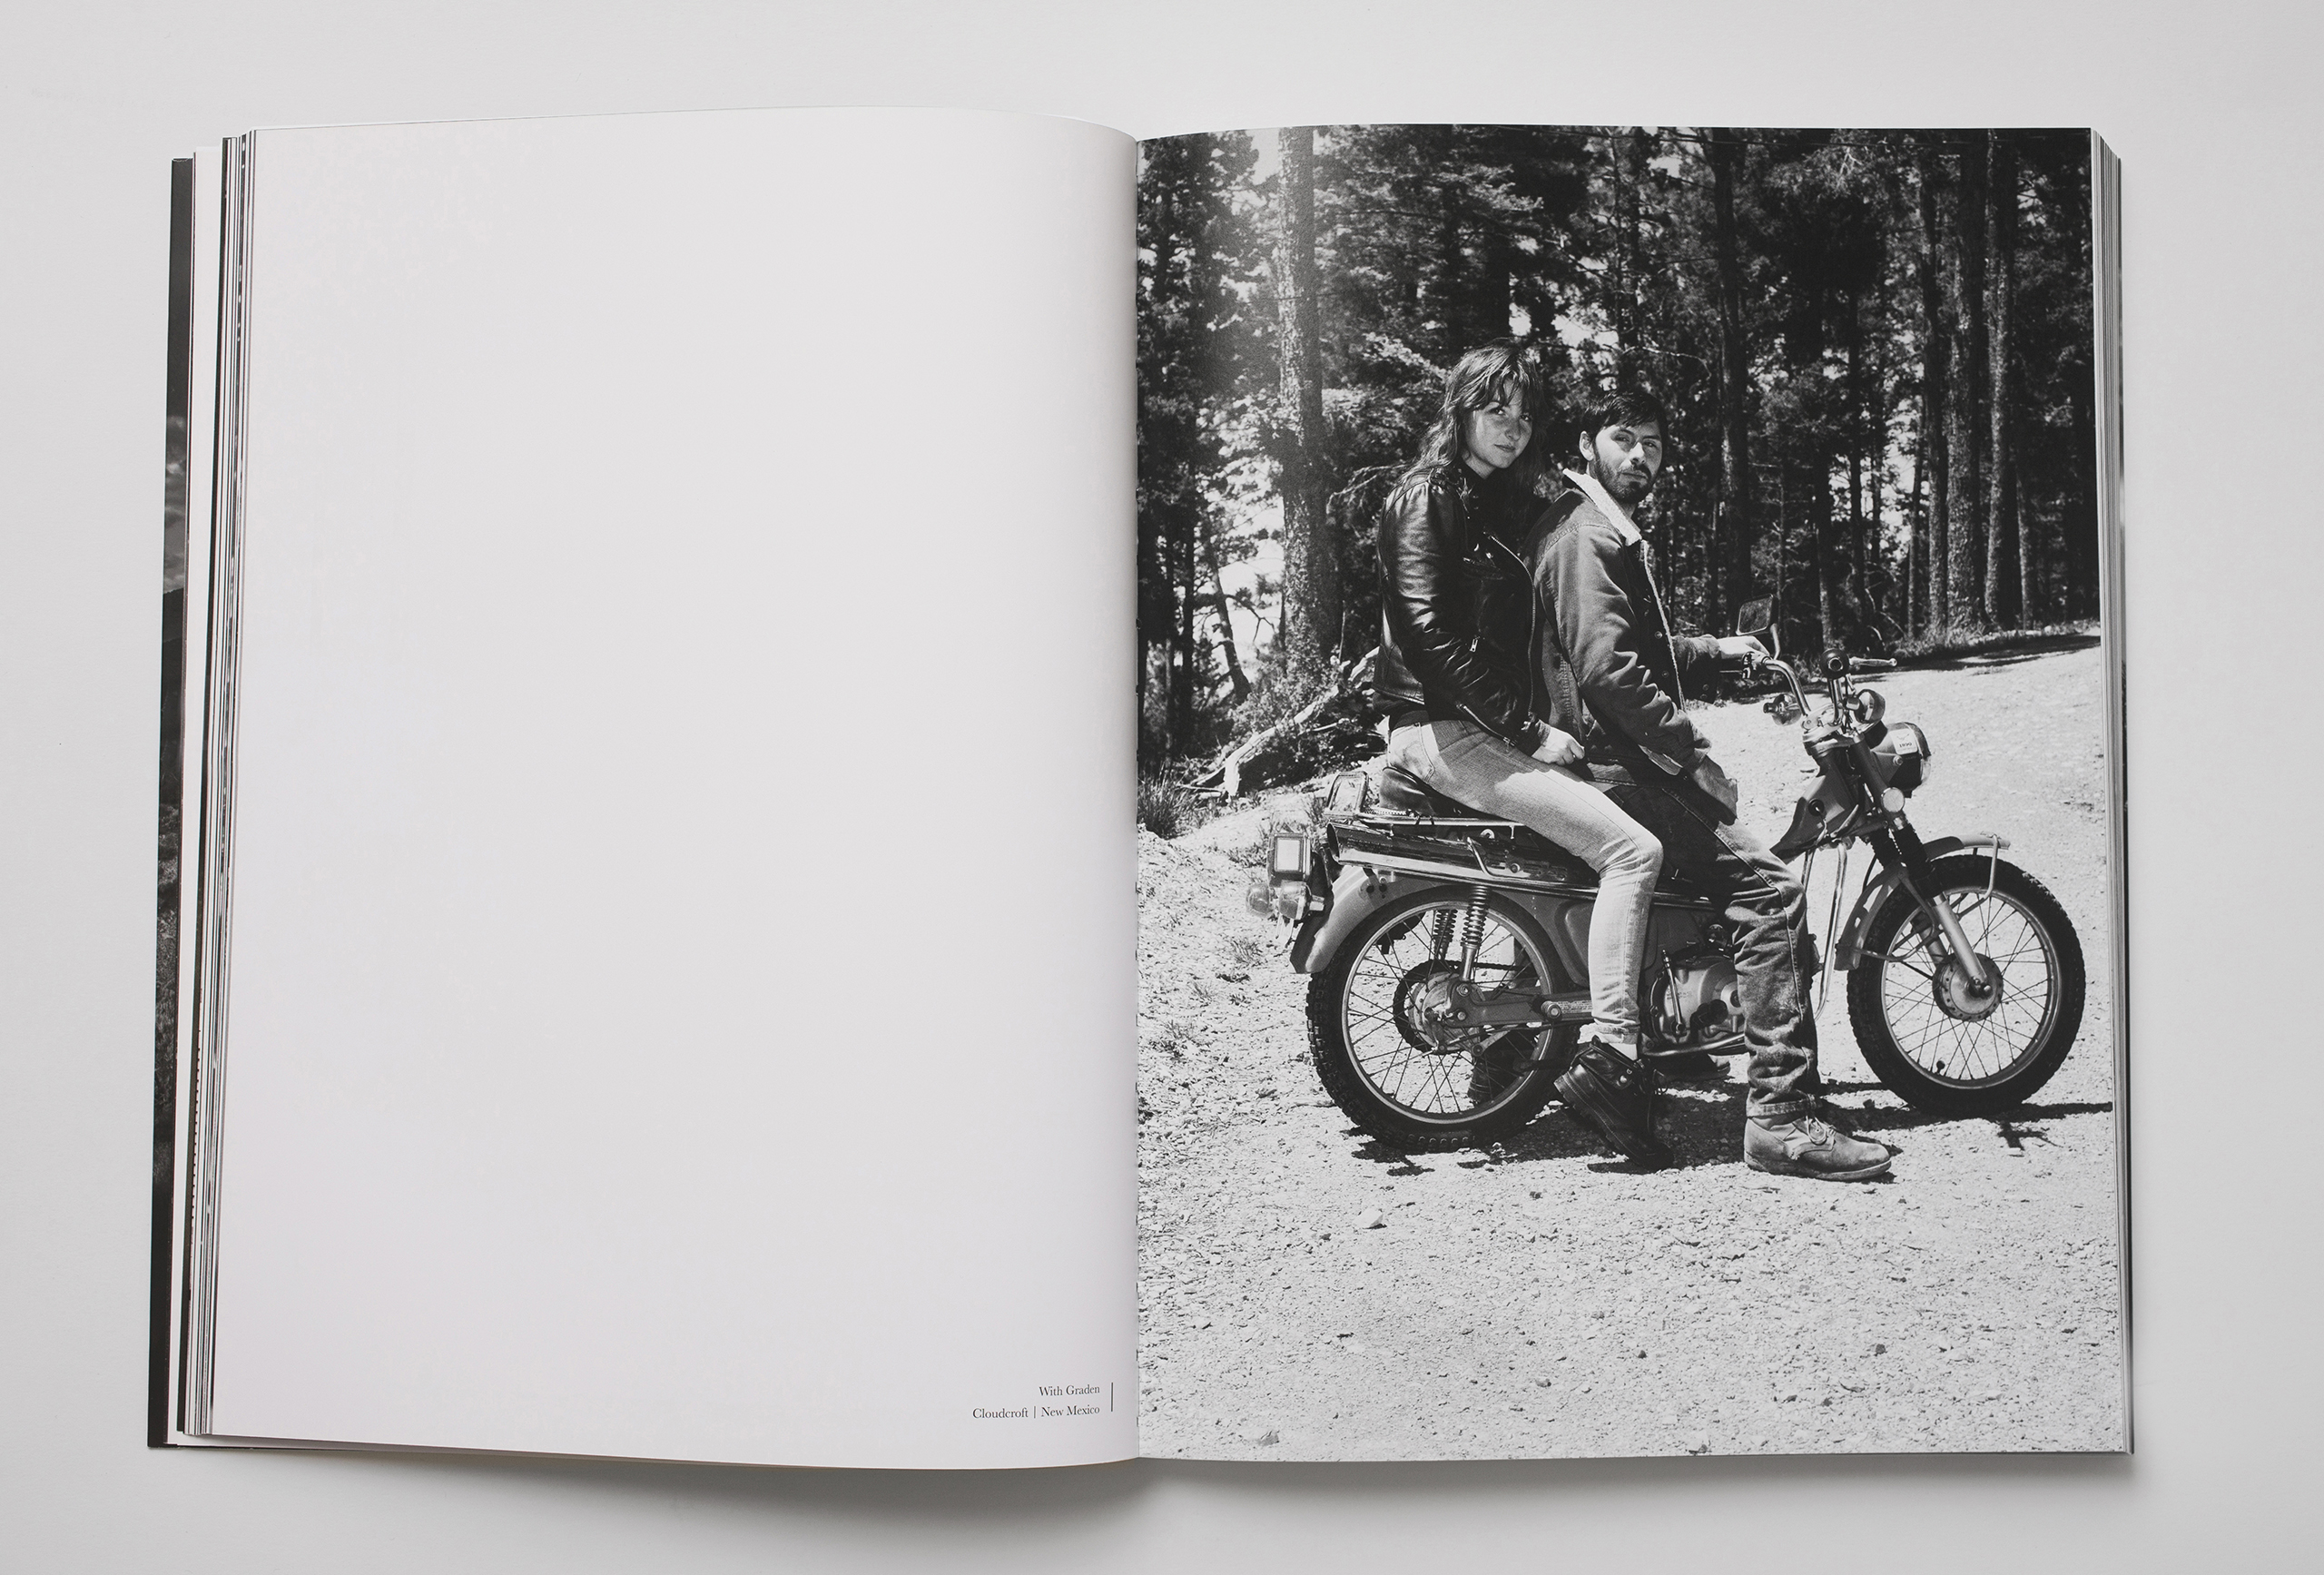 Selected by TIME LightBox Editor Olivier Laurent:  The American road trip is a photographic trope that's often abused by countless photographers, but Robin de Puy, through her truly personal approach, has produced an opus that sets her apart from the masses. Her American road trip spanned 8,000 miles on a motorcycle, but you'll rarely see pictures of stunning landscapes in her work. Instead, the Dutch photographer chose to focus on the people she met – sharing personal experiences that many photographes would shun. The result is a stunning study of today's America made all the more relevant after Donald Trump's election.”